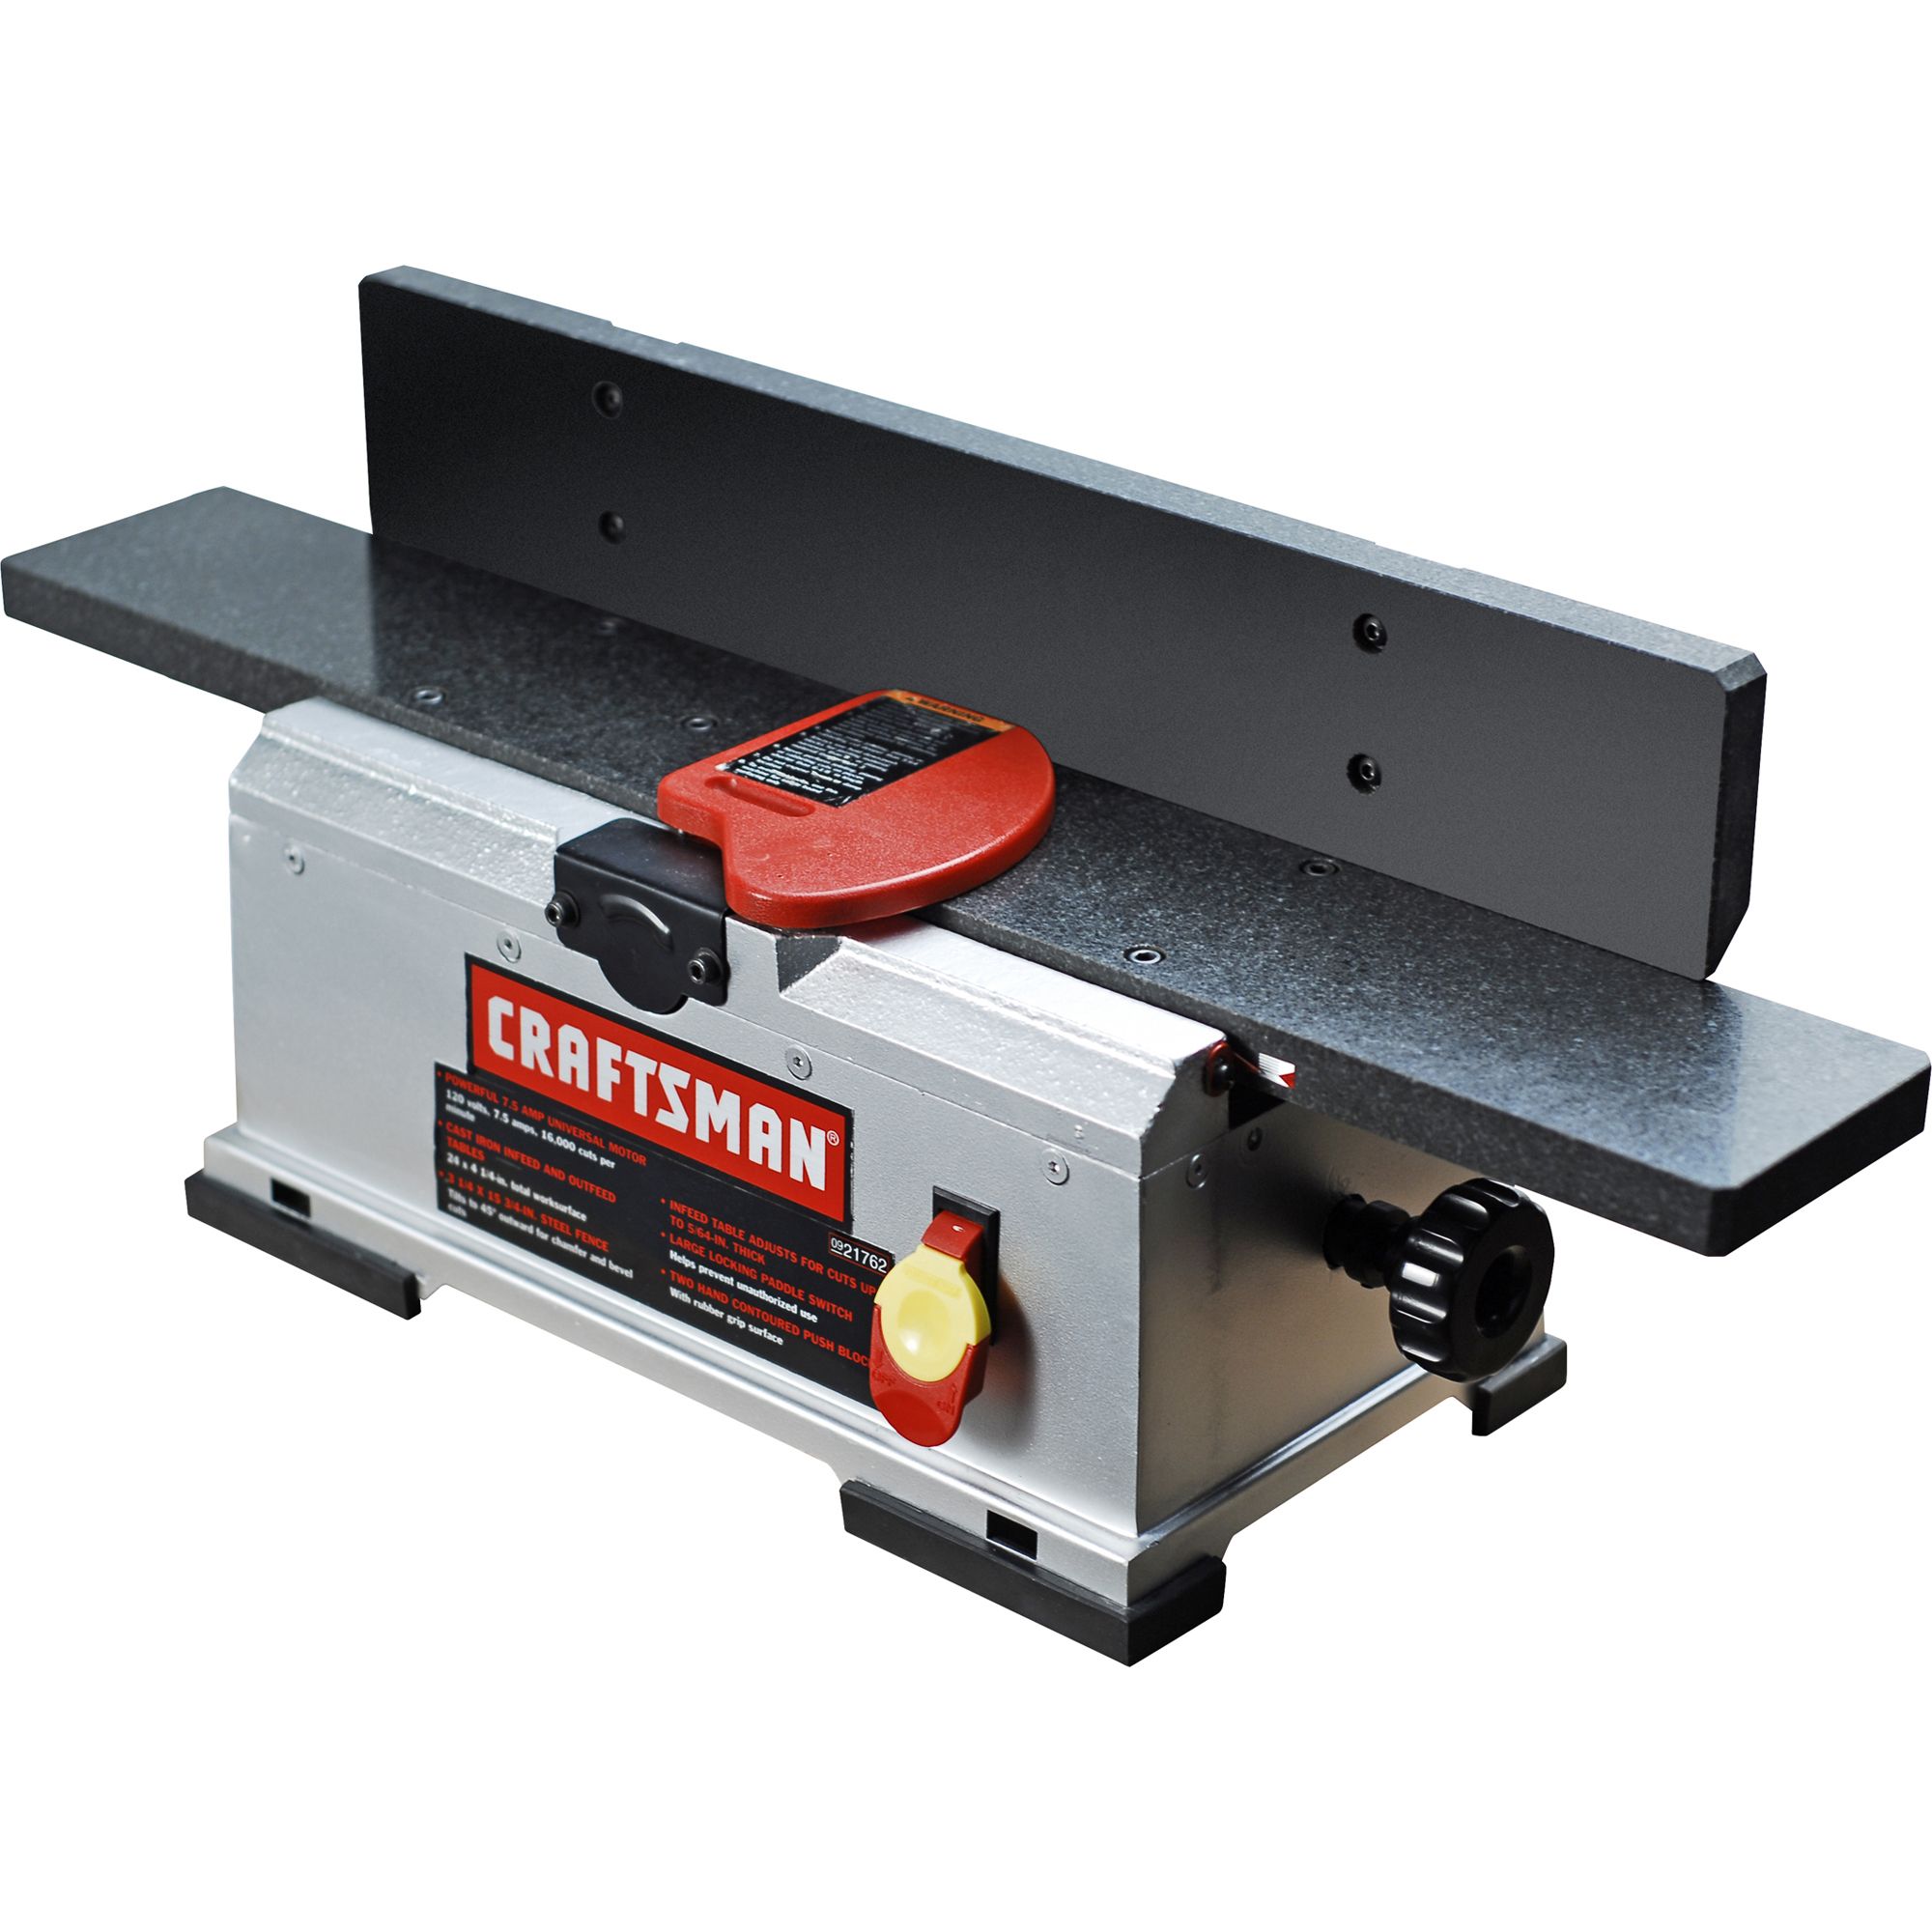 What Is A Woodworking Planer